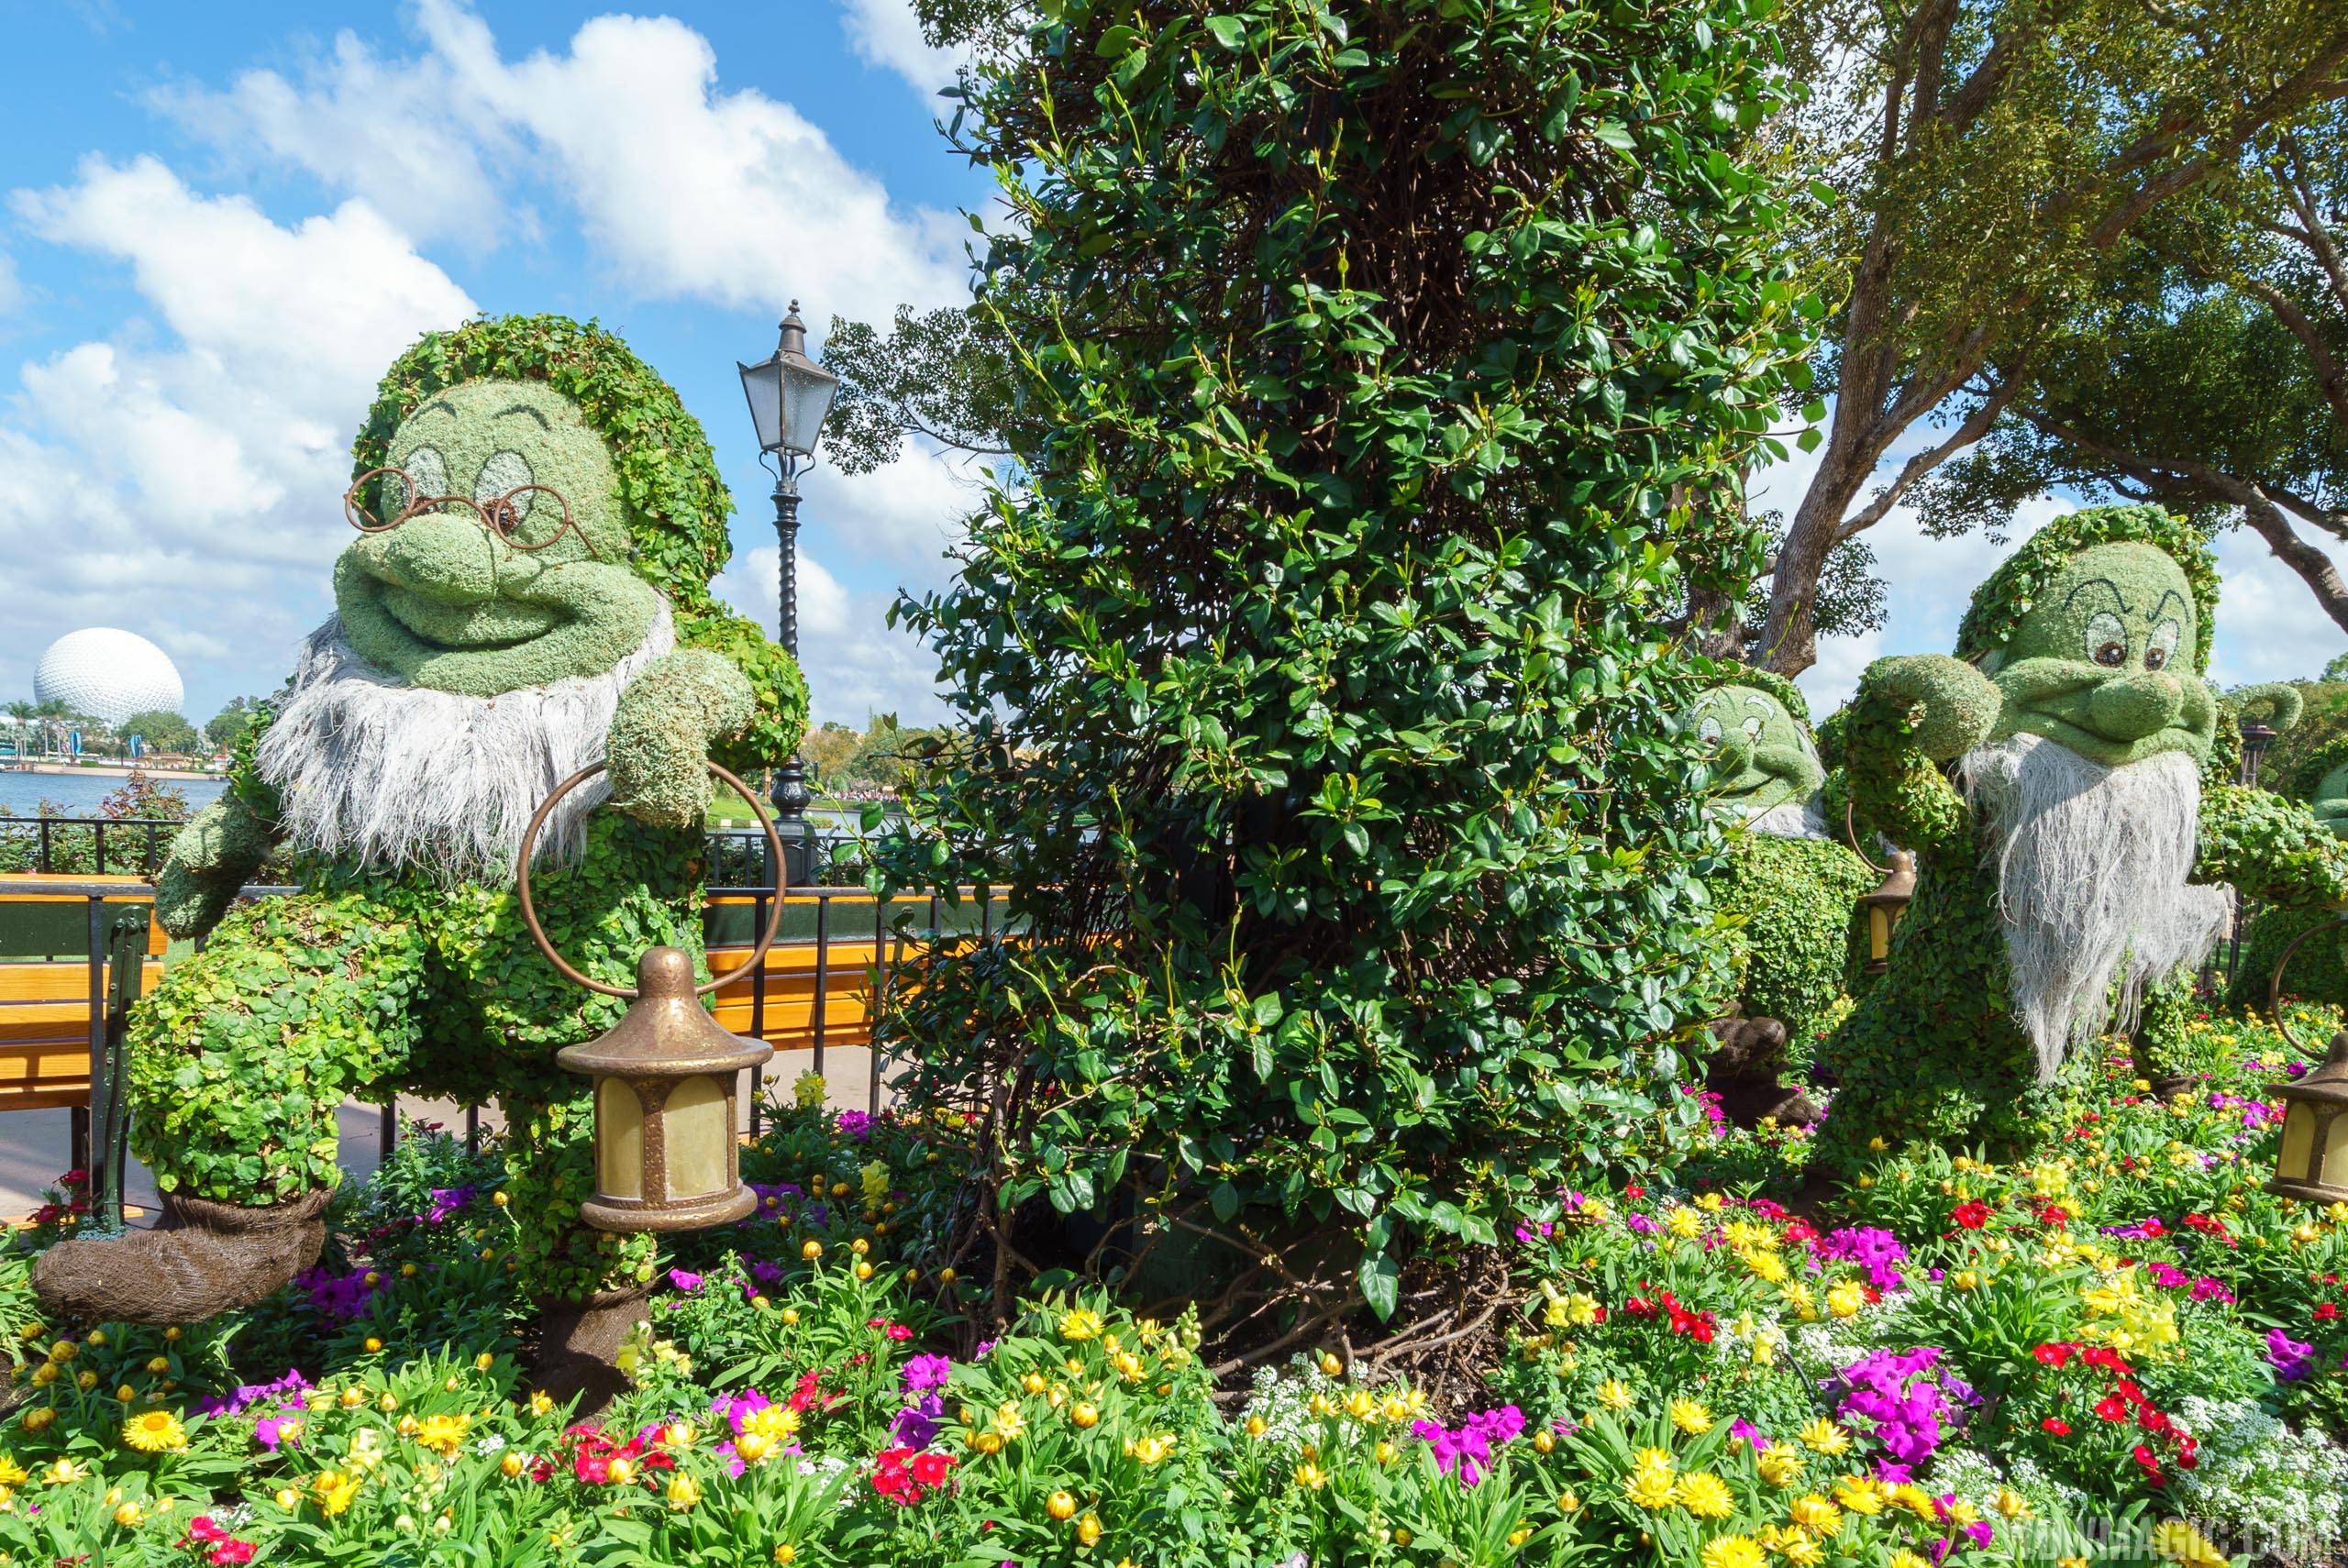 2017 Flower and Garden Festival - Snow White and the Seven Dwarfs topiaries at the Germany Pavilion